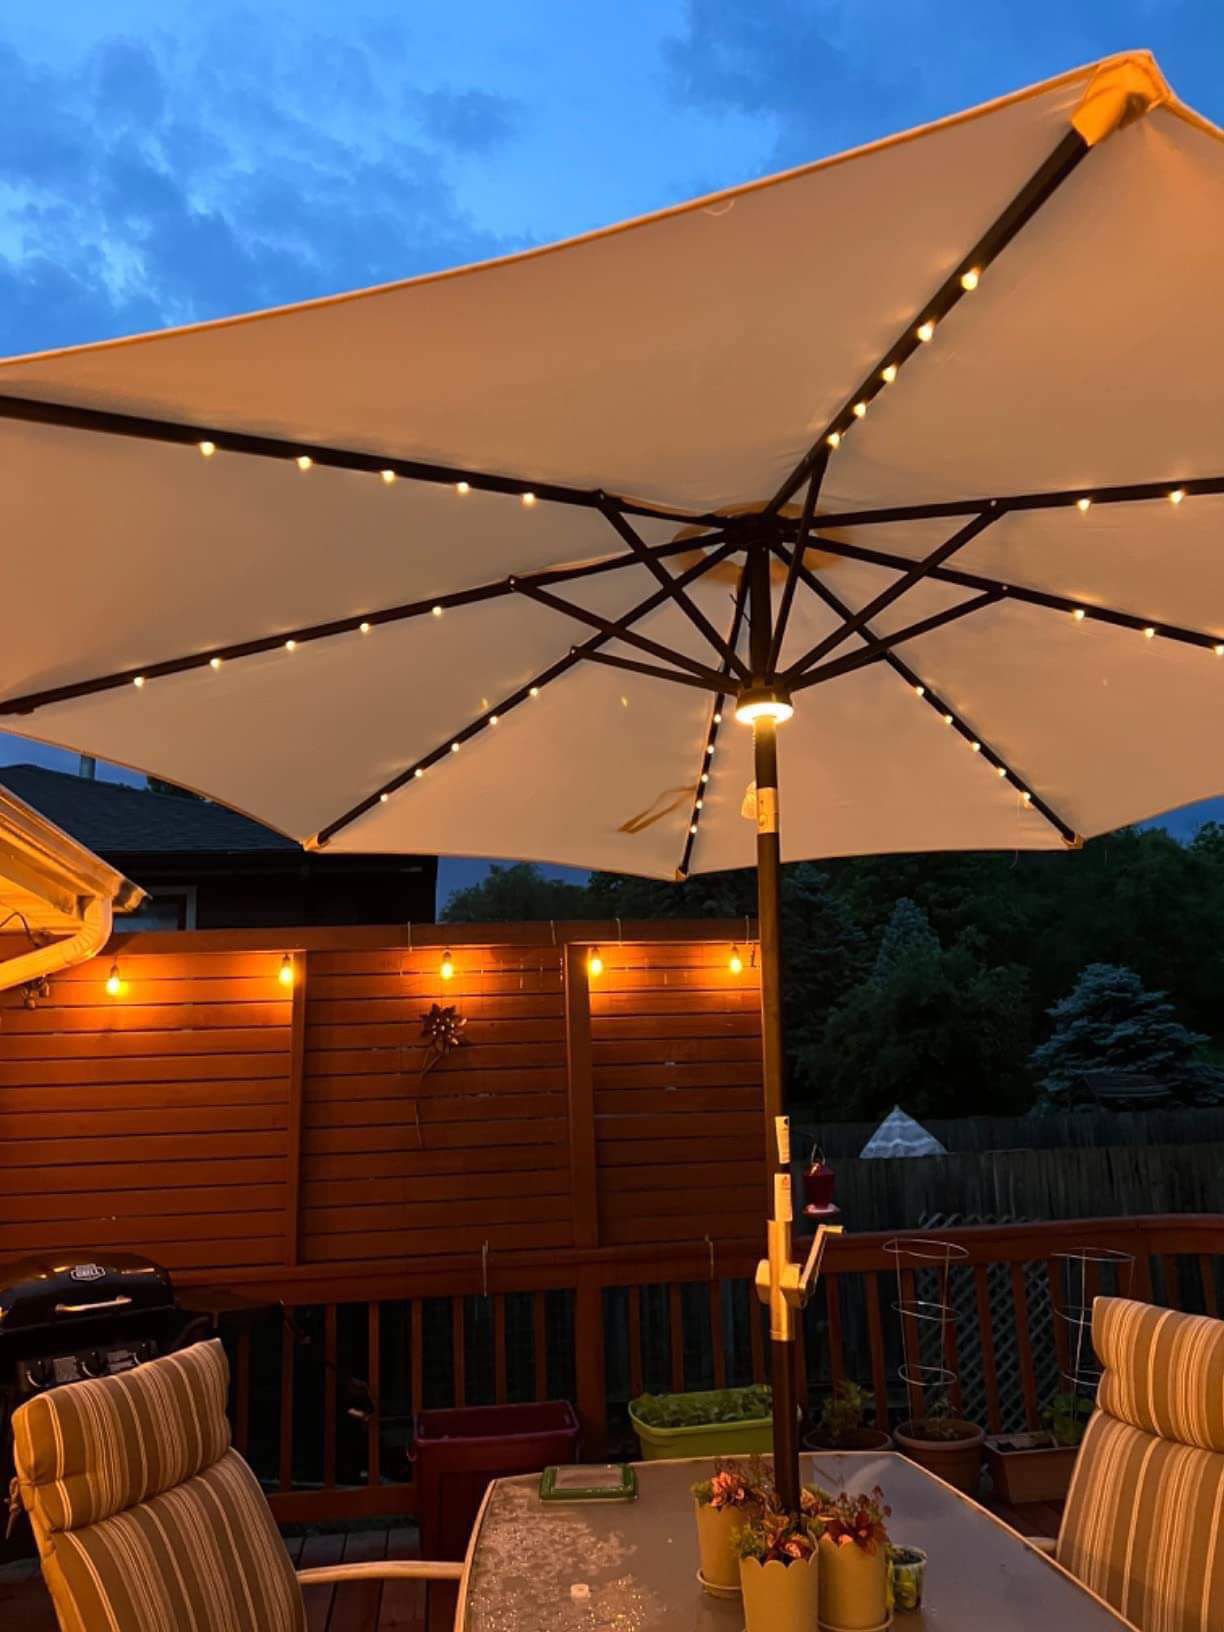 Patio Umbrella New in Original Packaging 9 Ft With LED Lighting and Push Button Tilt Function.